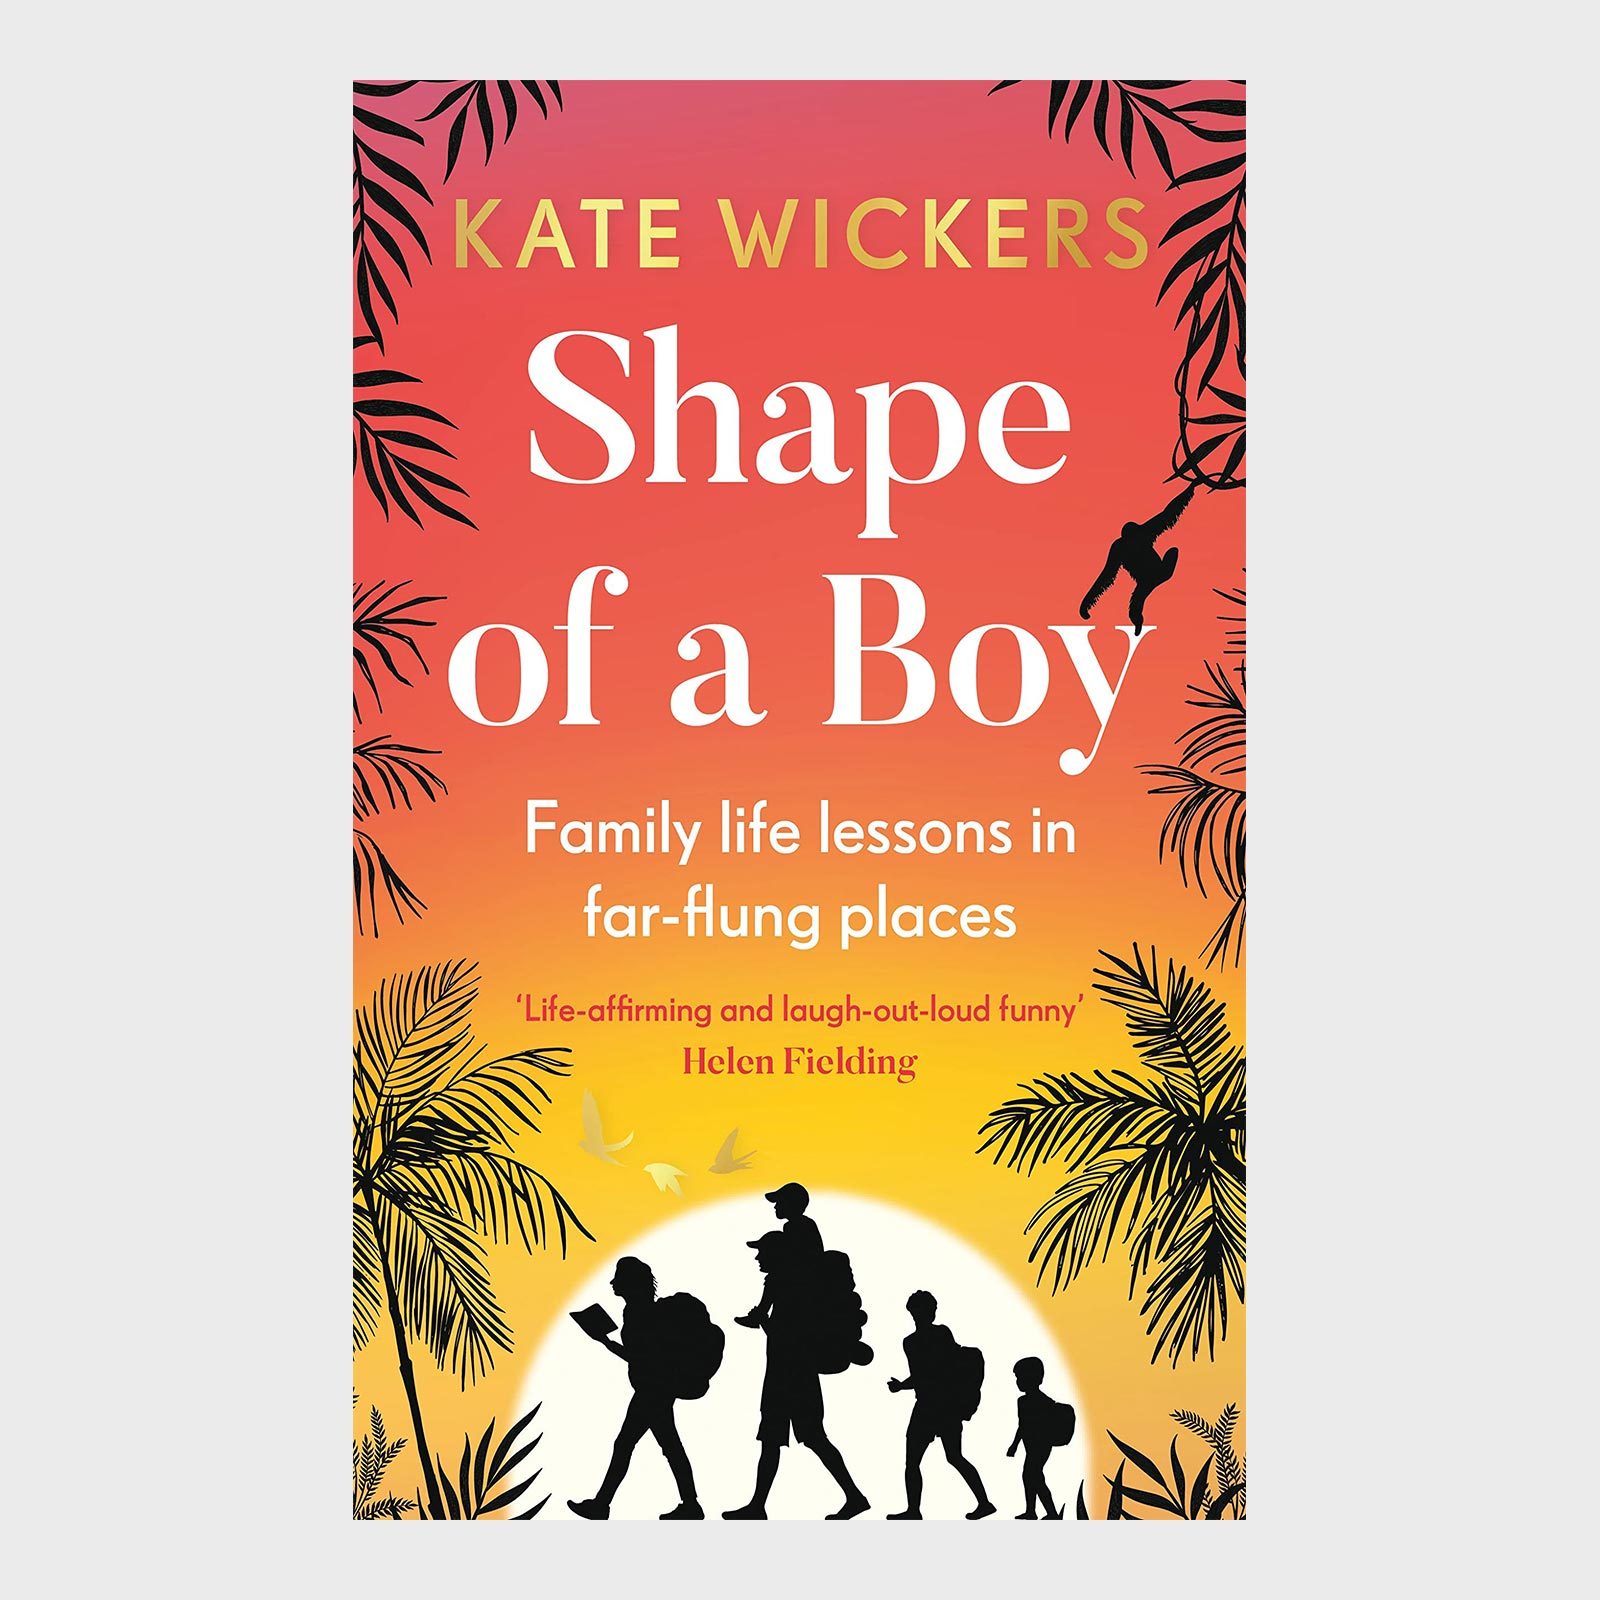 <h3><em>Shape of a Boy </em>by Kate Wickers</h3> <p><strong>Setting:</strong> The world (including Mexico, Jordan, Borneo, Sri Lanka and more)</p> <p>Sometimes a travel book, like travel itself, is more about the journey than the destination. That's the case with <a href="https://www.amazon.com/Shape-Boy-Family-lessons-places/dp/0711267170" rel="noopener noreferrer"><em>Shape of a Boy</em></a>, the 2022 memoir by British travel journalist Kate Wickers. Reading this book is like jet-setting with a <a href="https://www.rd.com/list/books-about-friendship/">trusted friend</a>—with her three boys and husband along for good measure. Each chapter starts off with a new location on their round-the-world trip, describing their experiences and the lessons they learned there. It's a delightful smattering of stories sure to spark wanderlust for just about anywhere in the world.</p> <p class="listicle-page__cta-button-shop"><a class="shop-btn" href="https://www.amazon.com/Shape-Boy-Family-lessons-places/dp/0711267170">Shop Now</a></p>